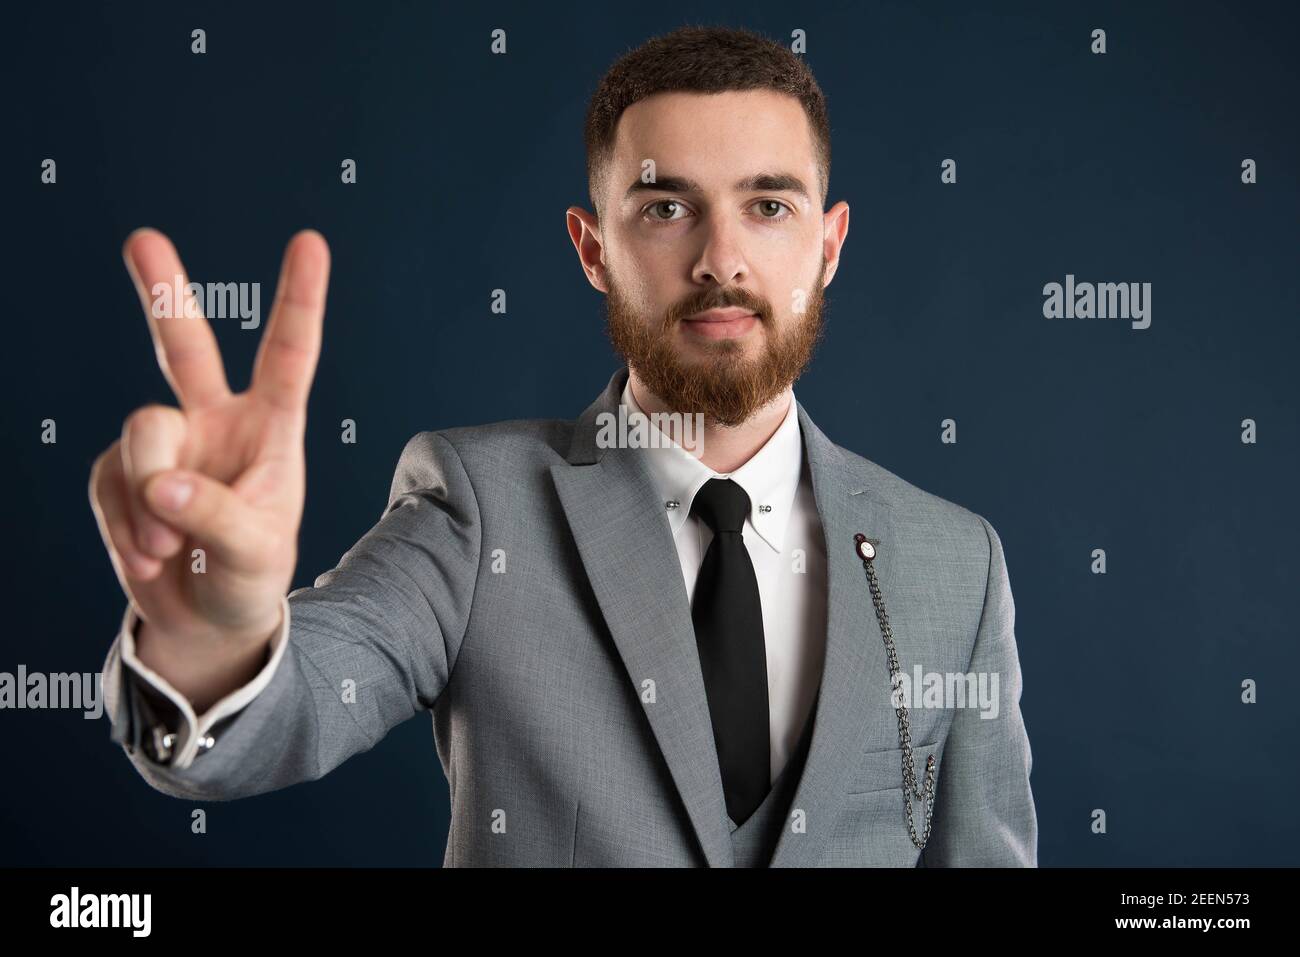 Young businessman showing peace sign wearing a grey suit Stock Photo